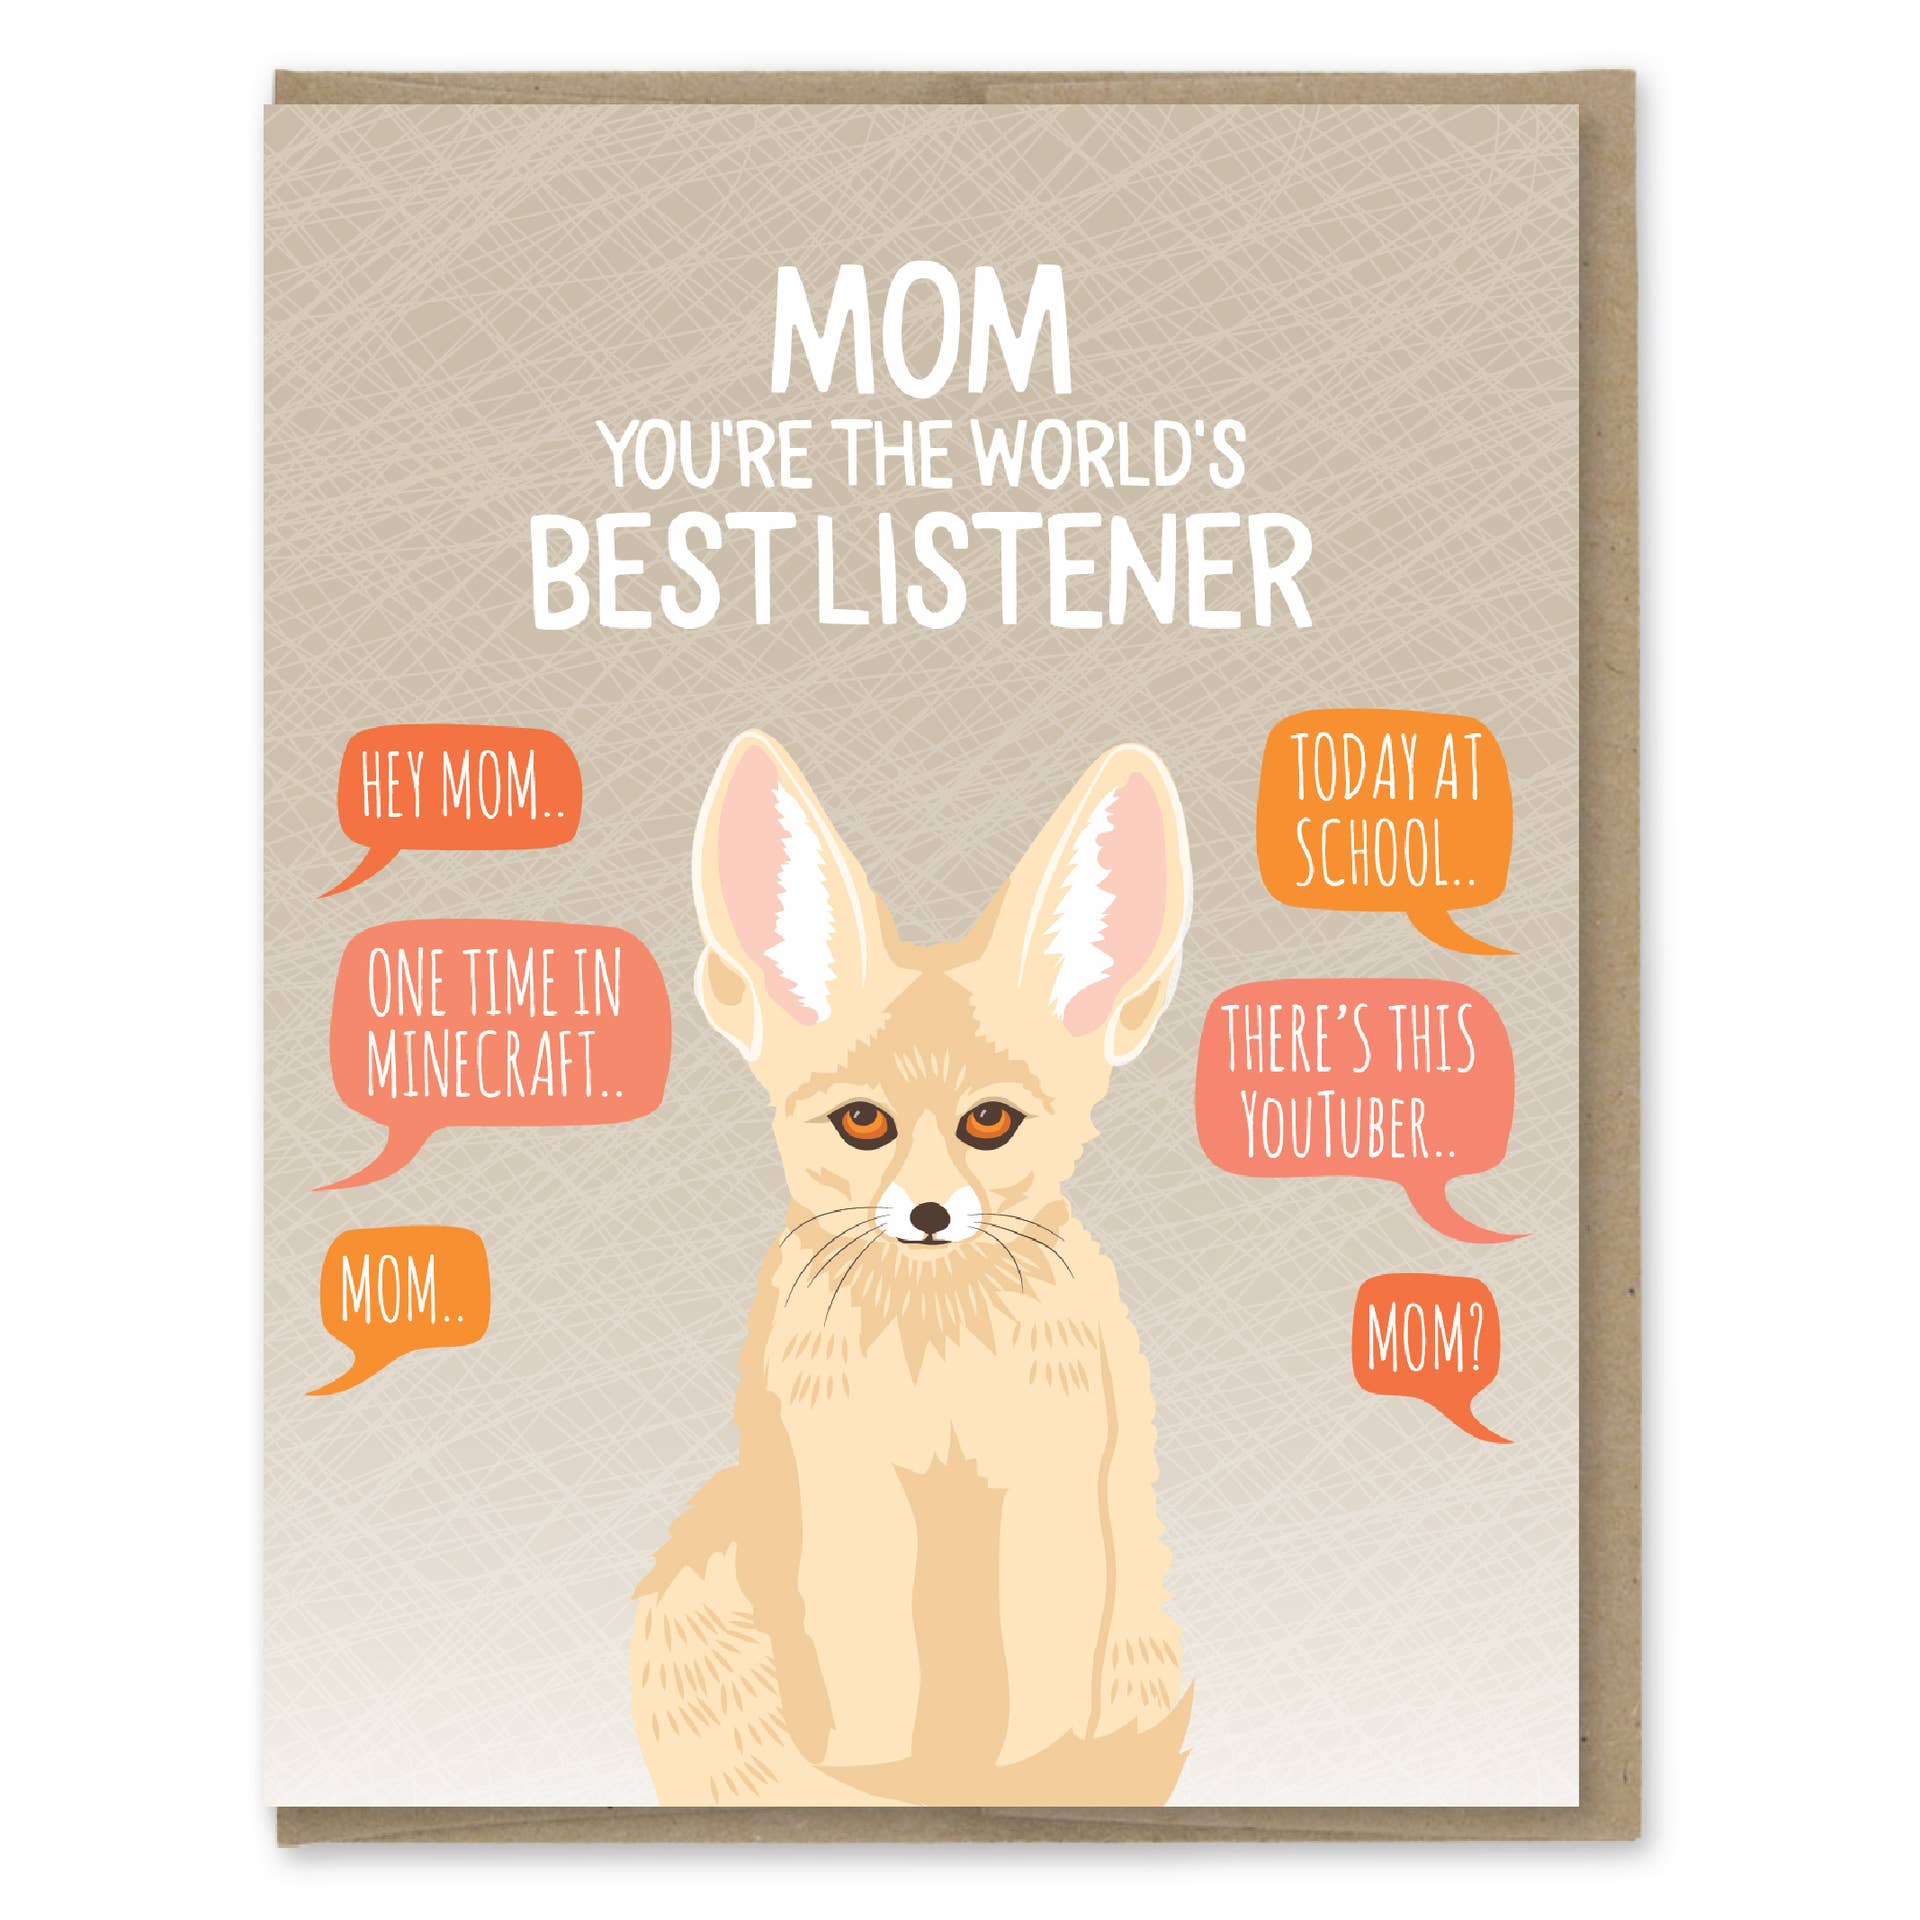 Modern Printed Matter “Mom You're the World’s Best Listener” Mother's Day Card